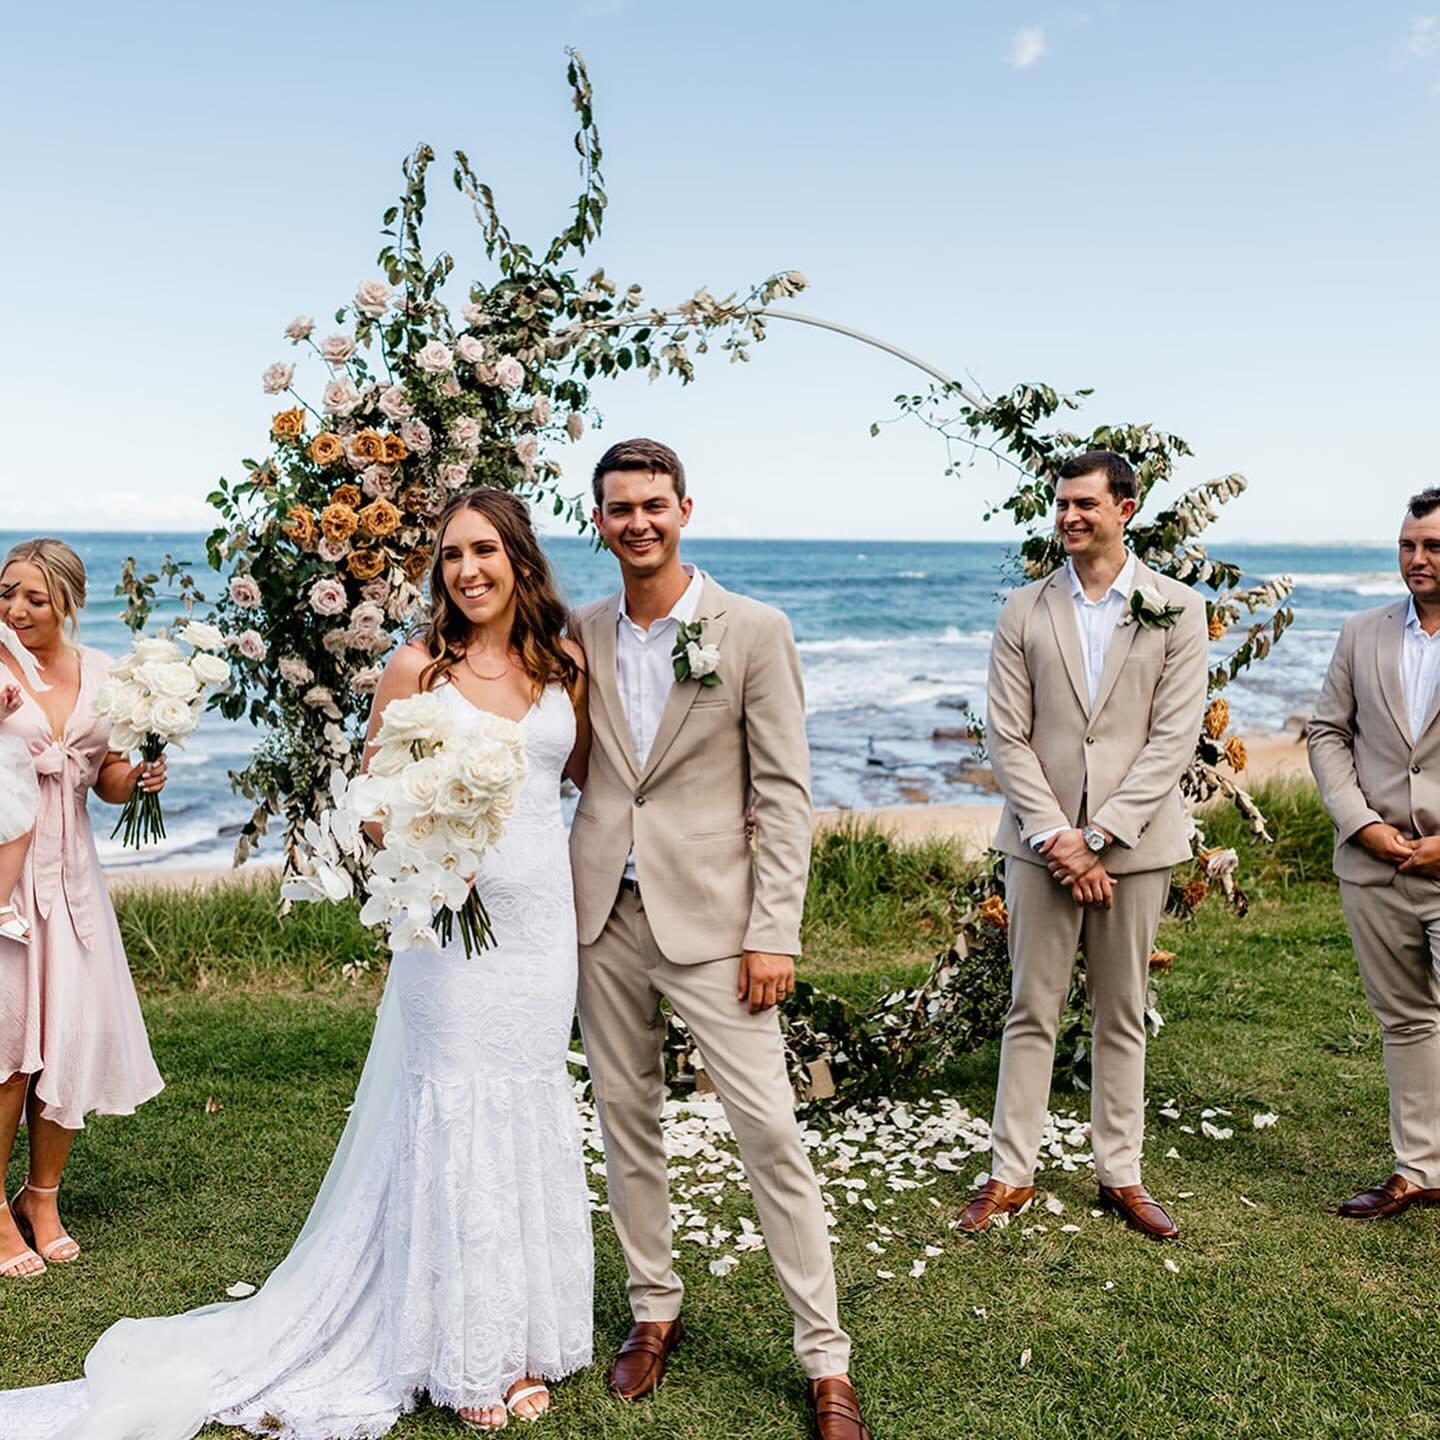 Love by the sea in rusts, blushes &amp; greens 🦢 

🎥 - @kjimageswedding